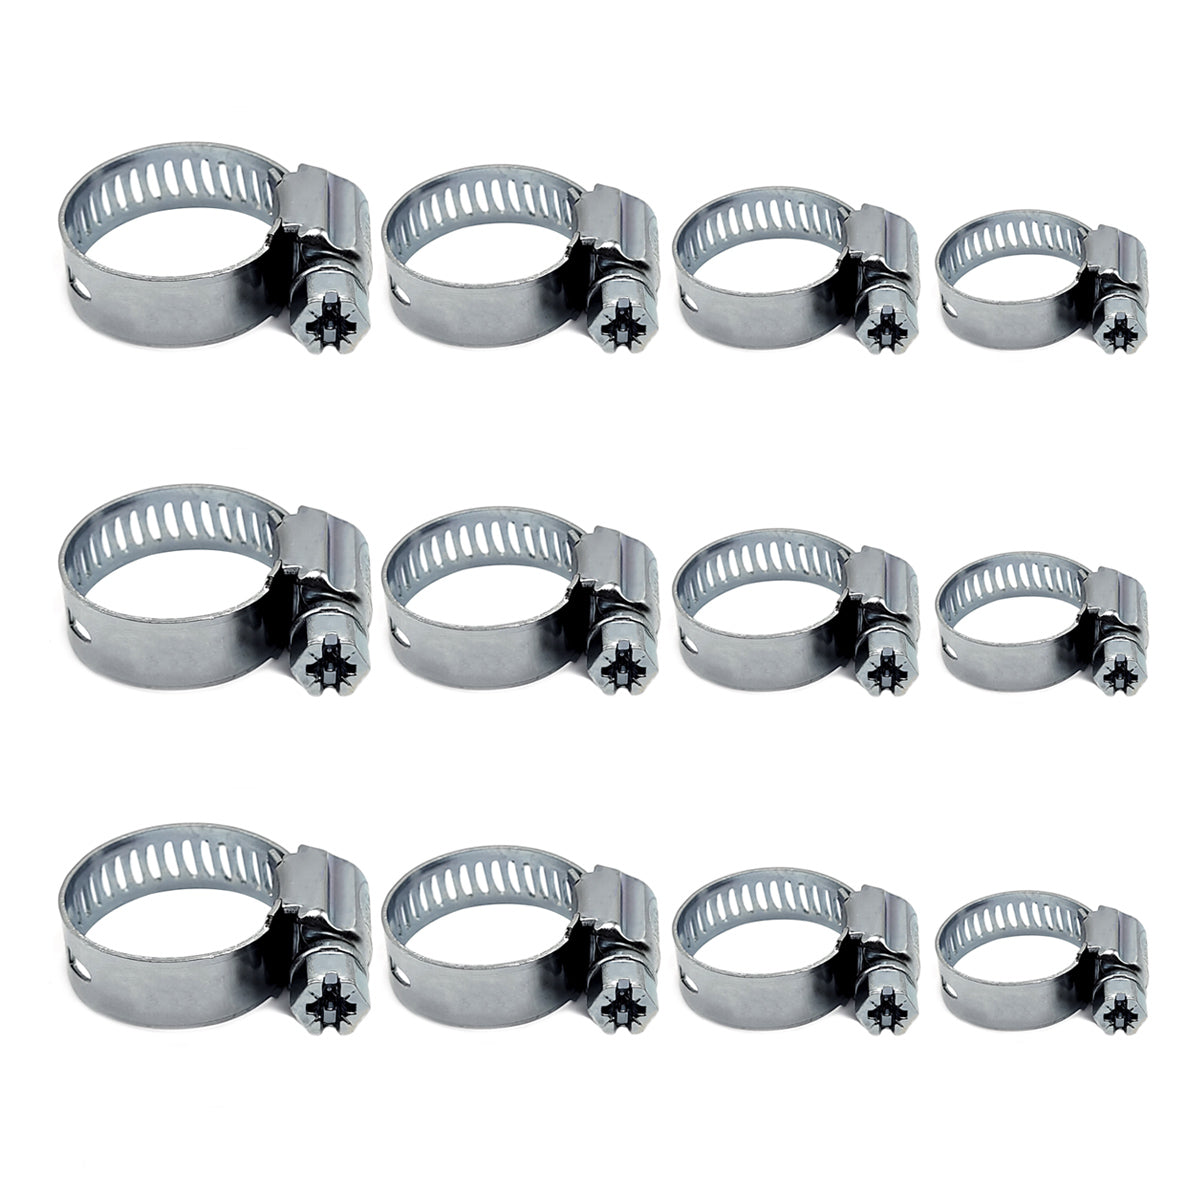 12 Pcs Hose Clips Adjustable 8-35mm Range Hose Clamps Stainless Steel Pipe Clips Assortment of 4 Sizes